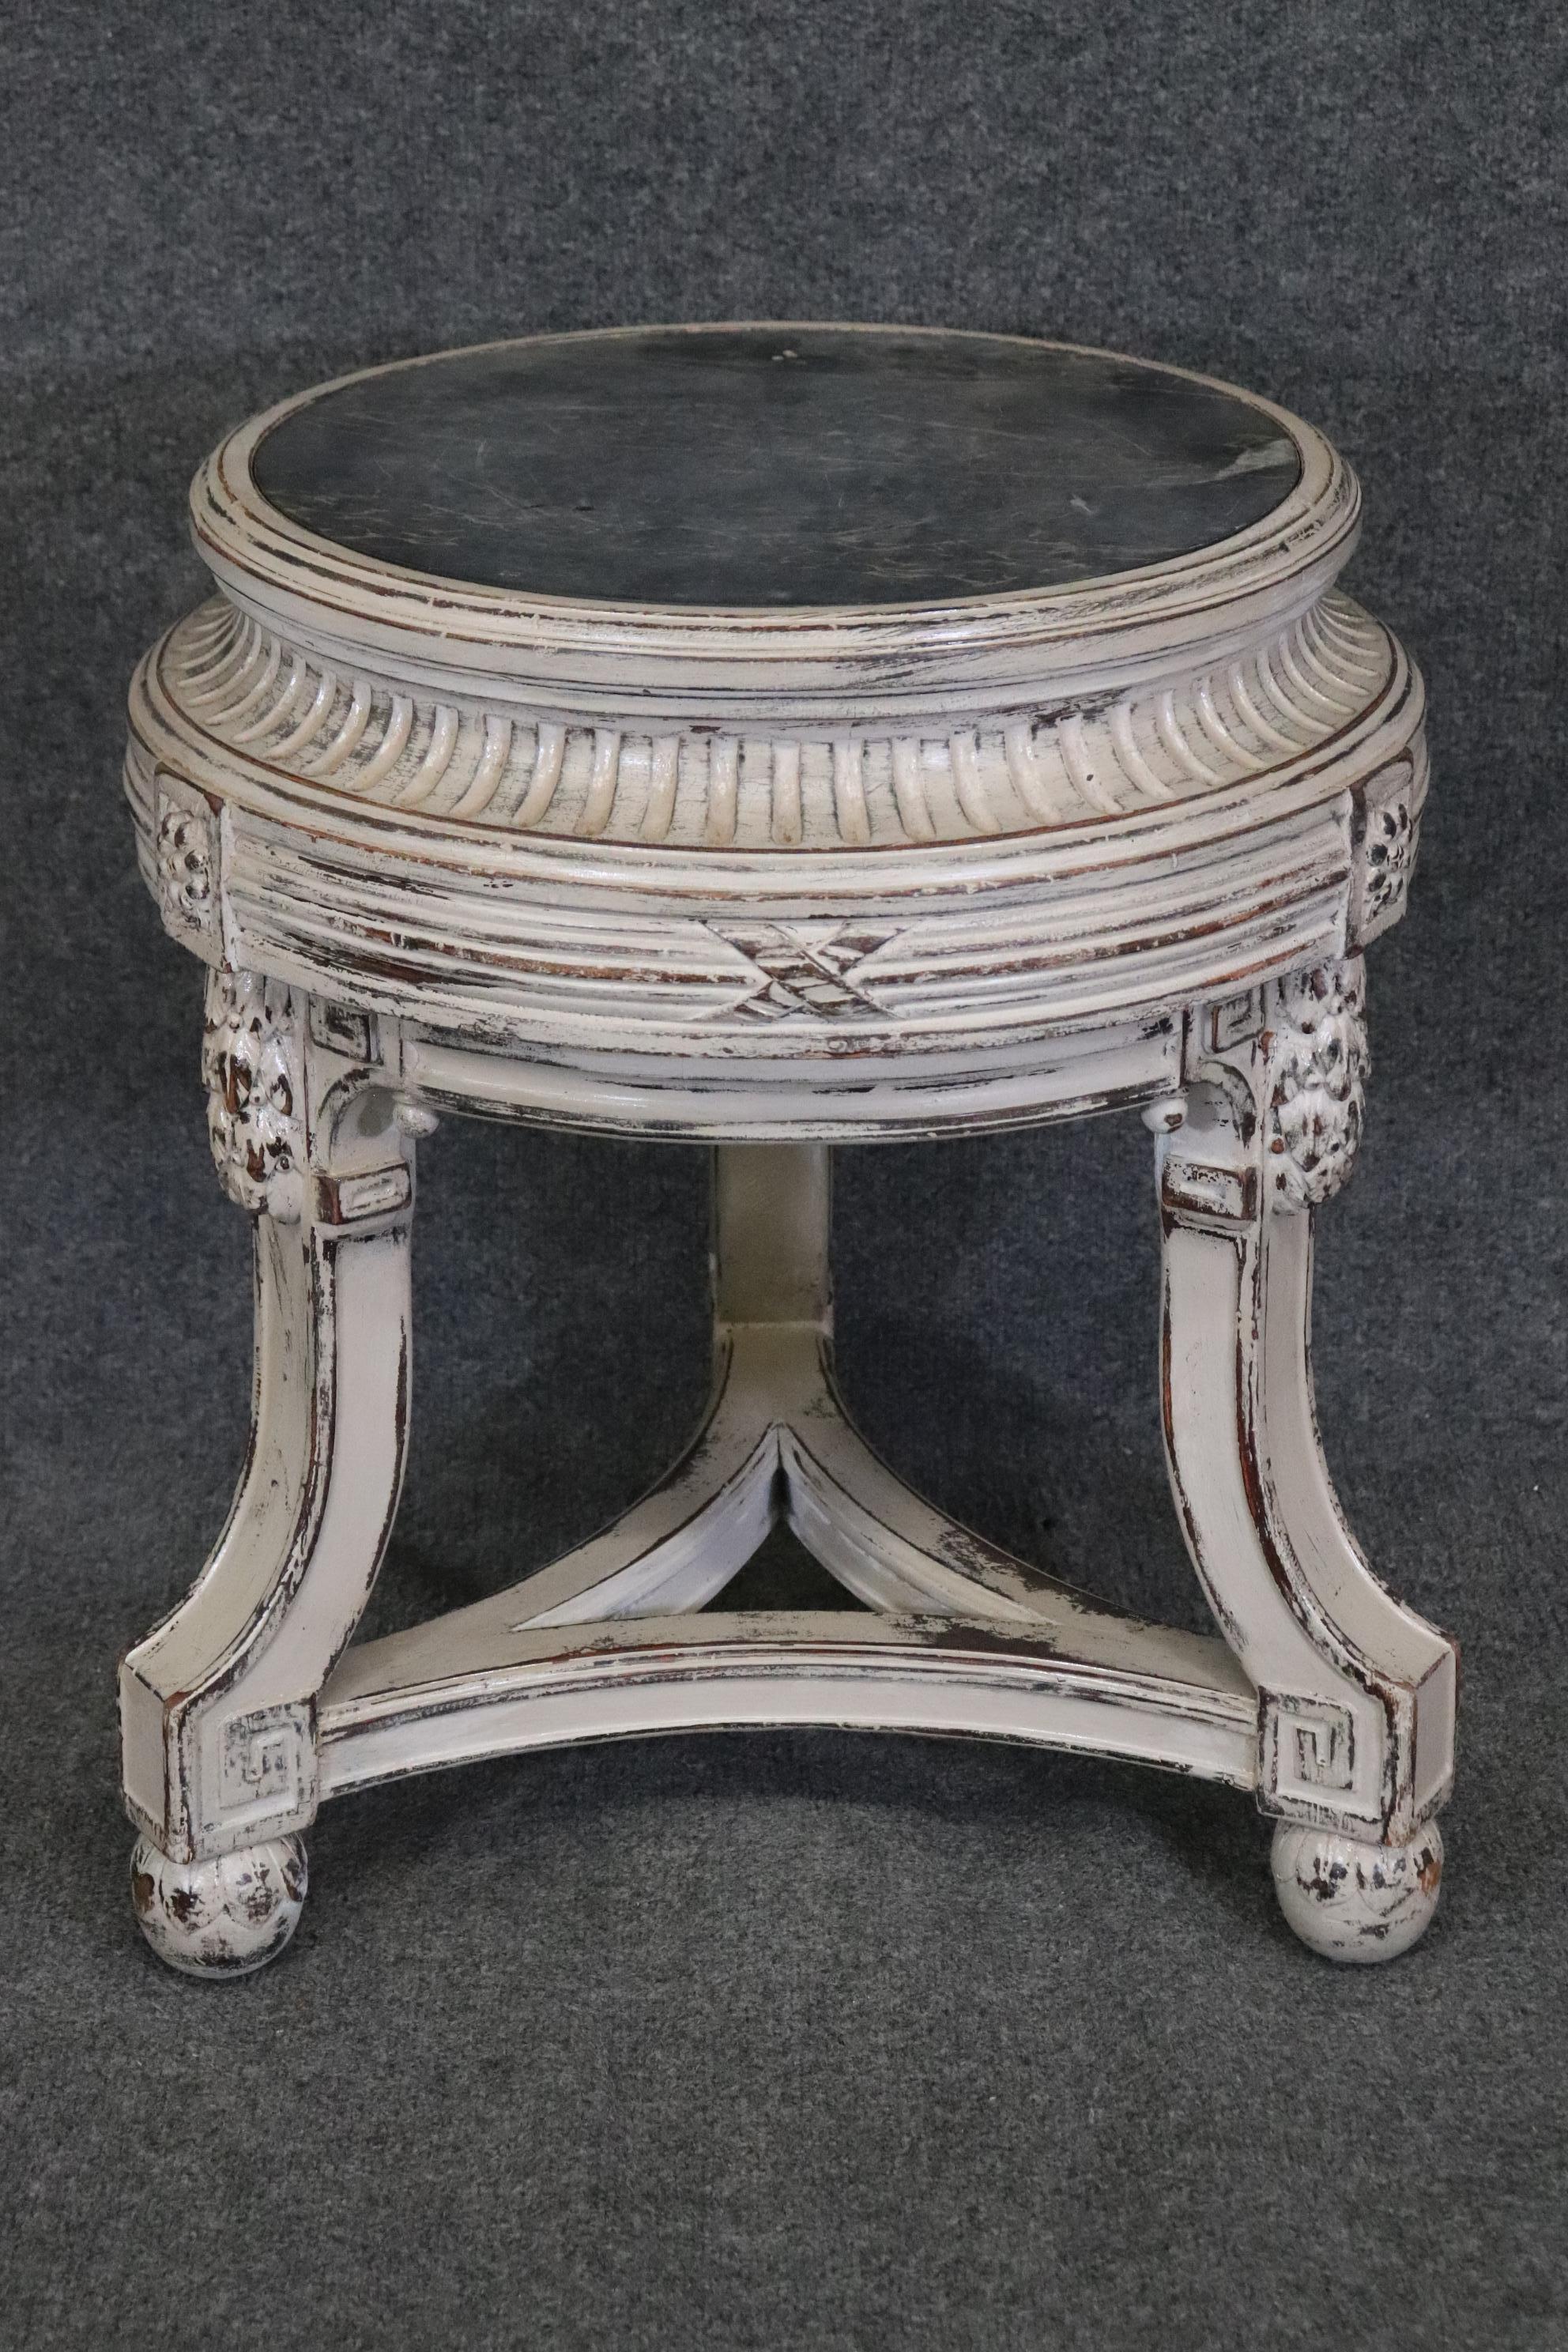 Regency Revival French Regency Style Distressed Finished Marble Top Round End Table Pedestal For Sale